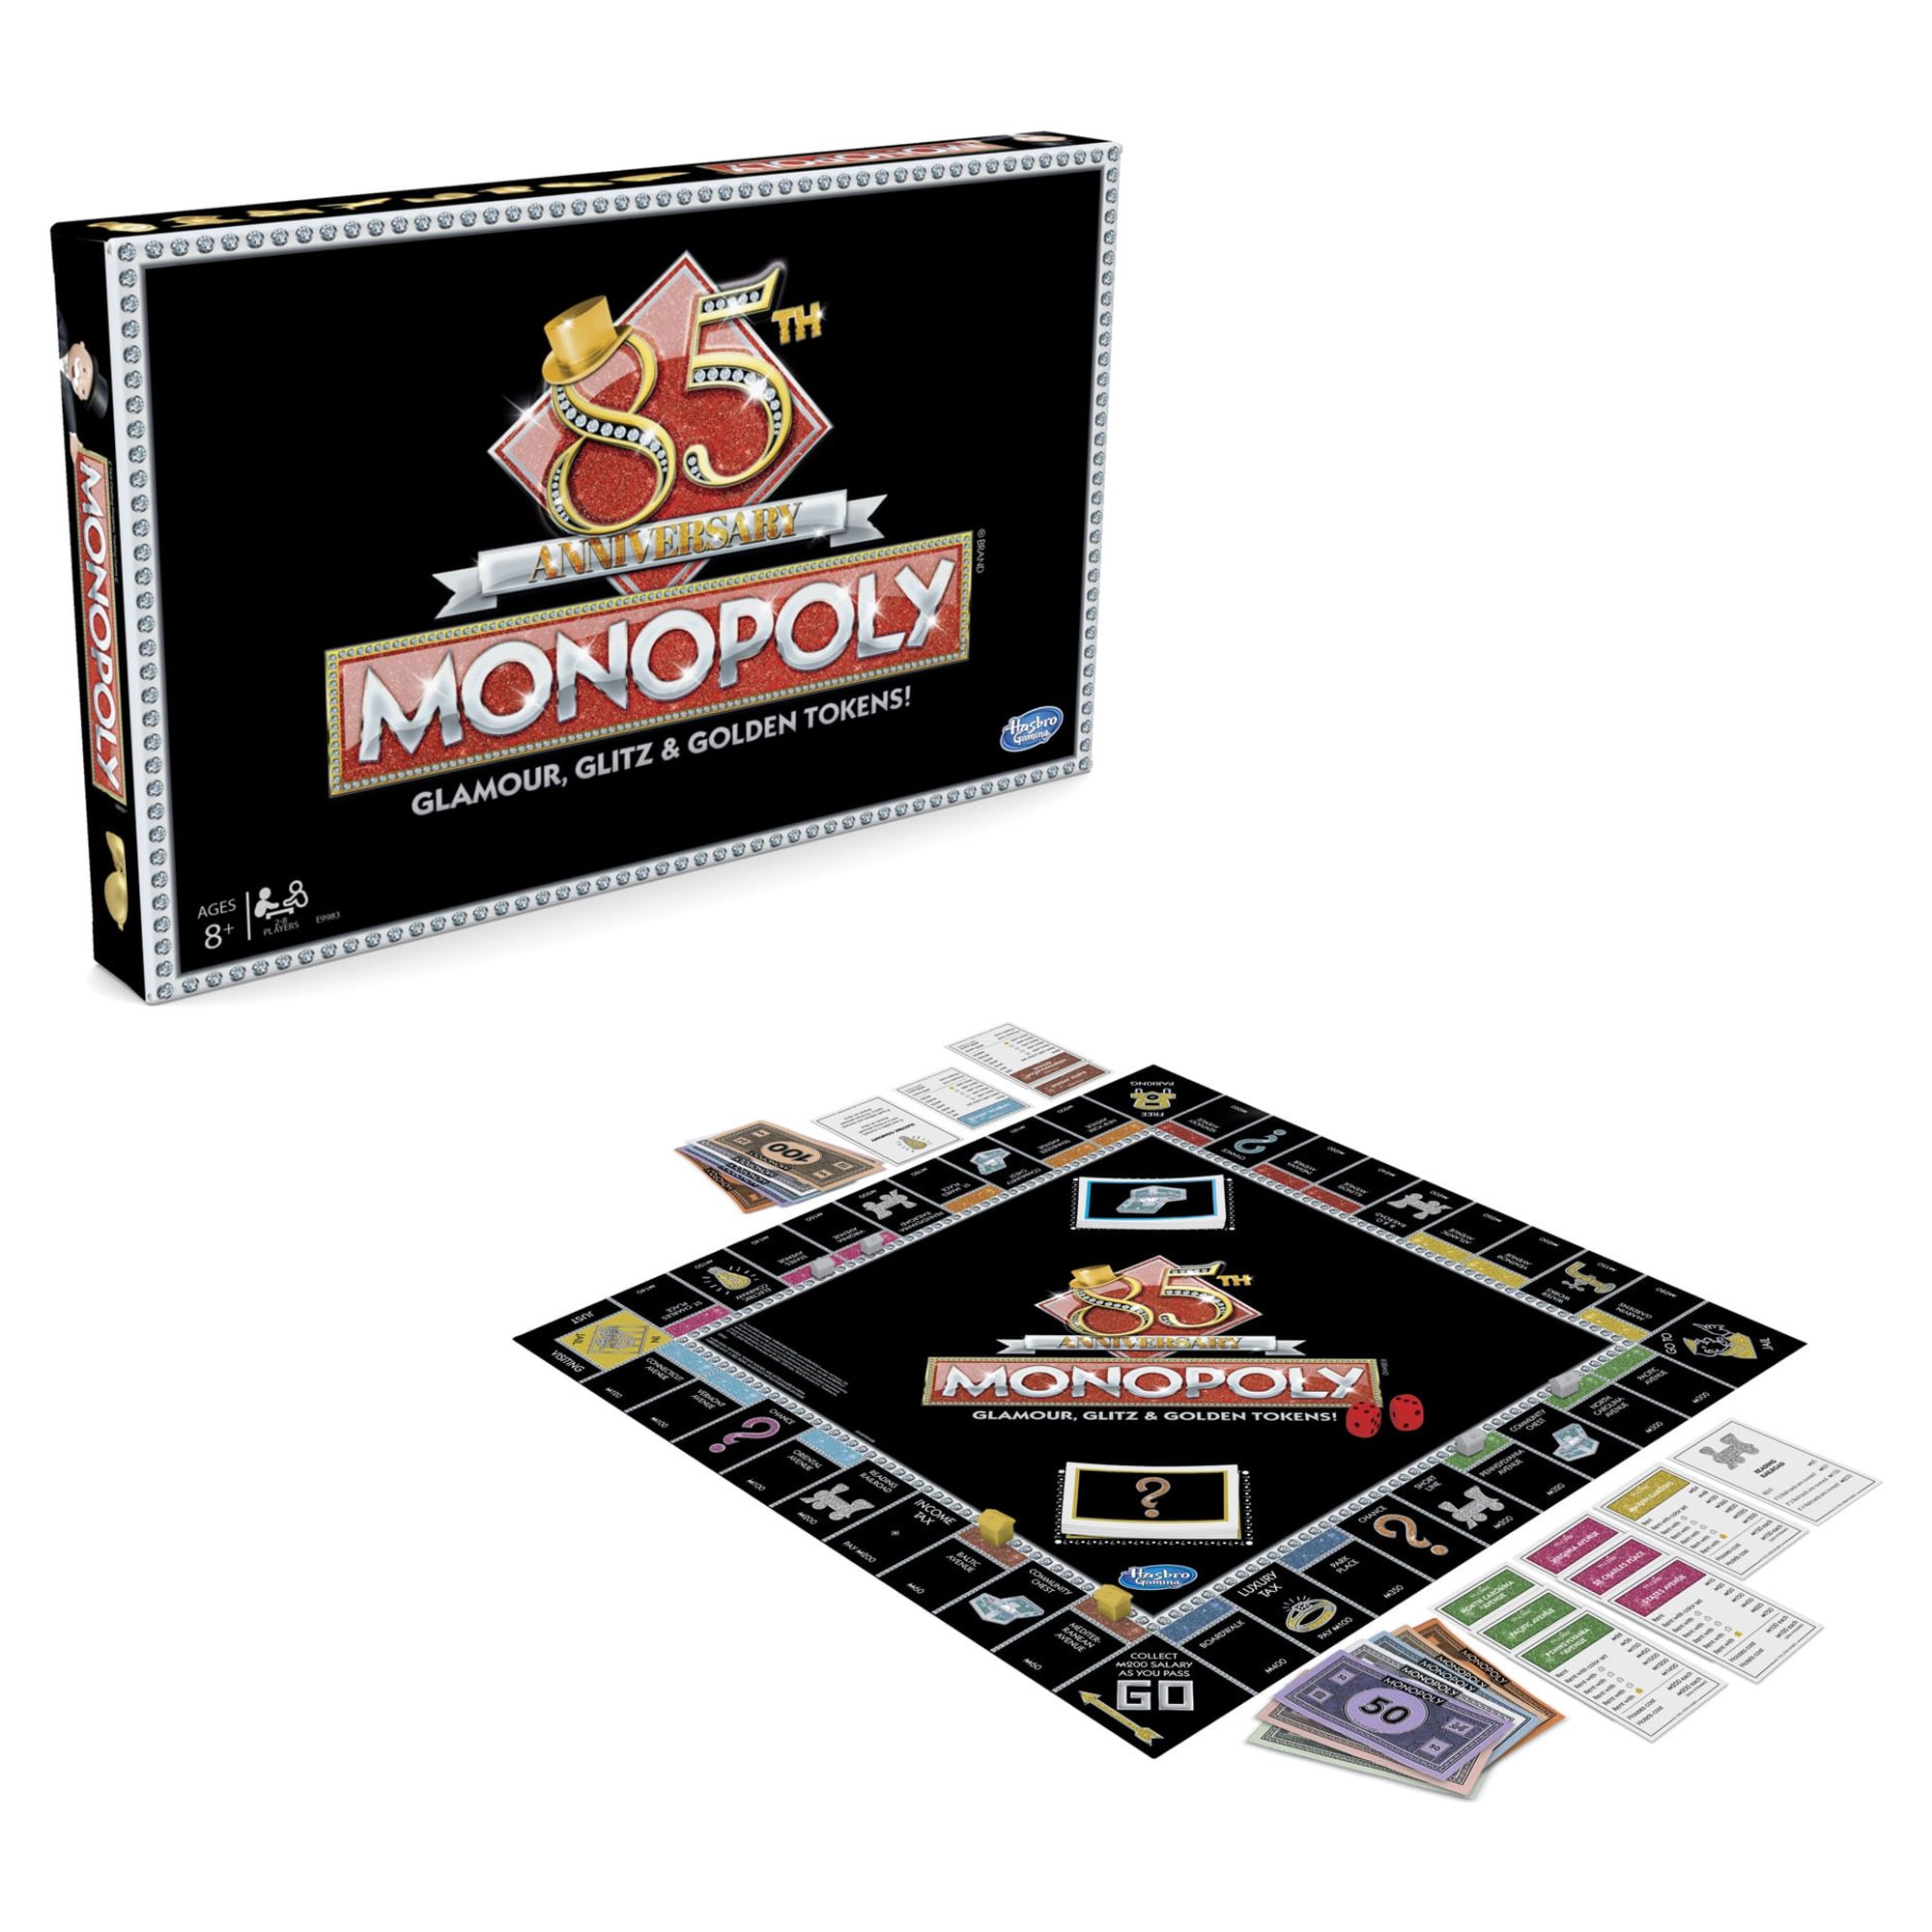 Monopoly 85Th anniversary Game, includes 8 Golden tokens - image 2 of 8